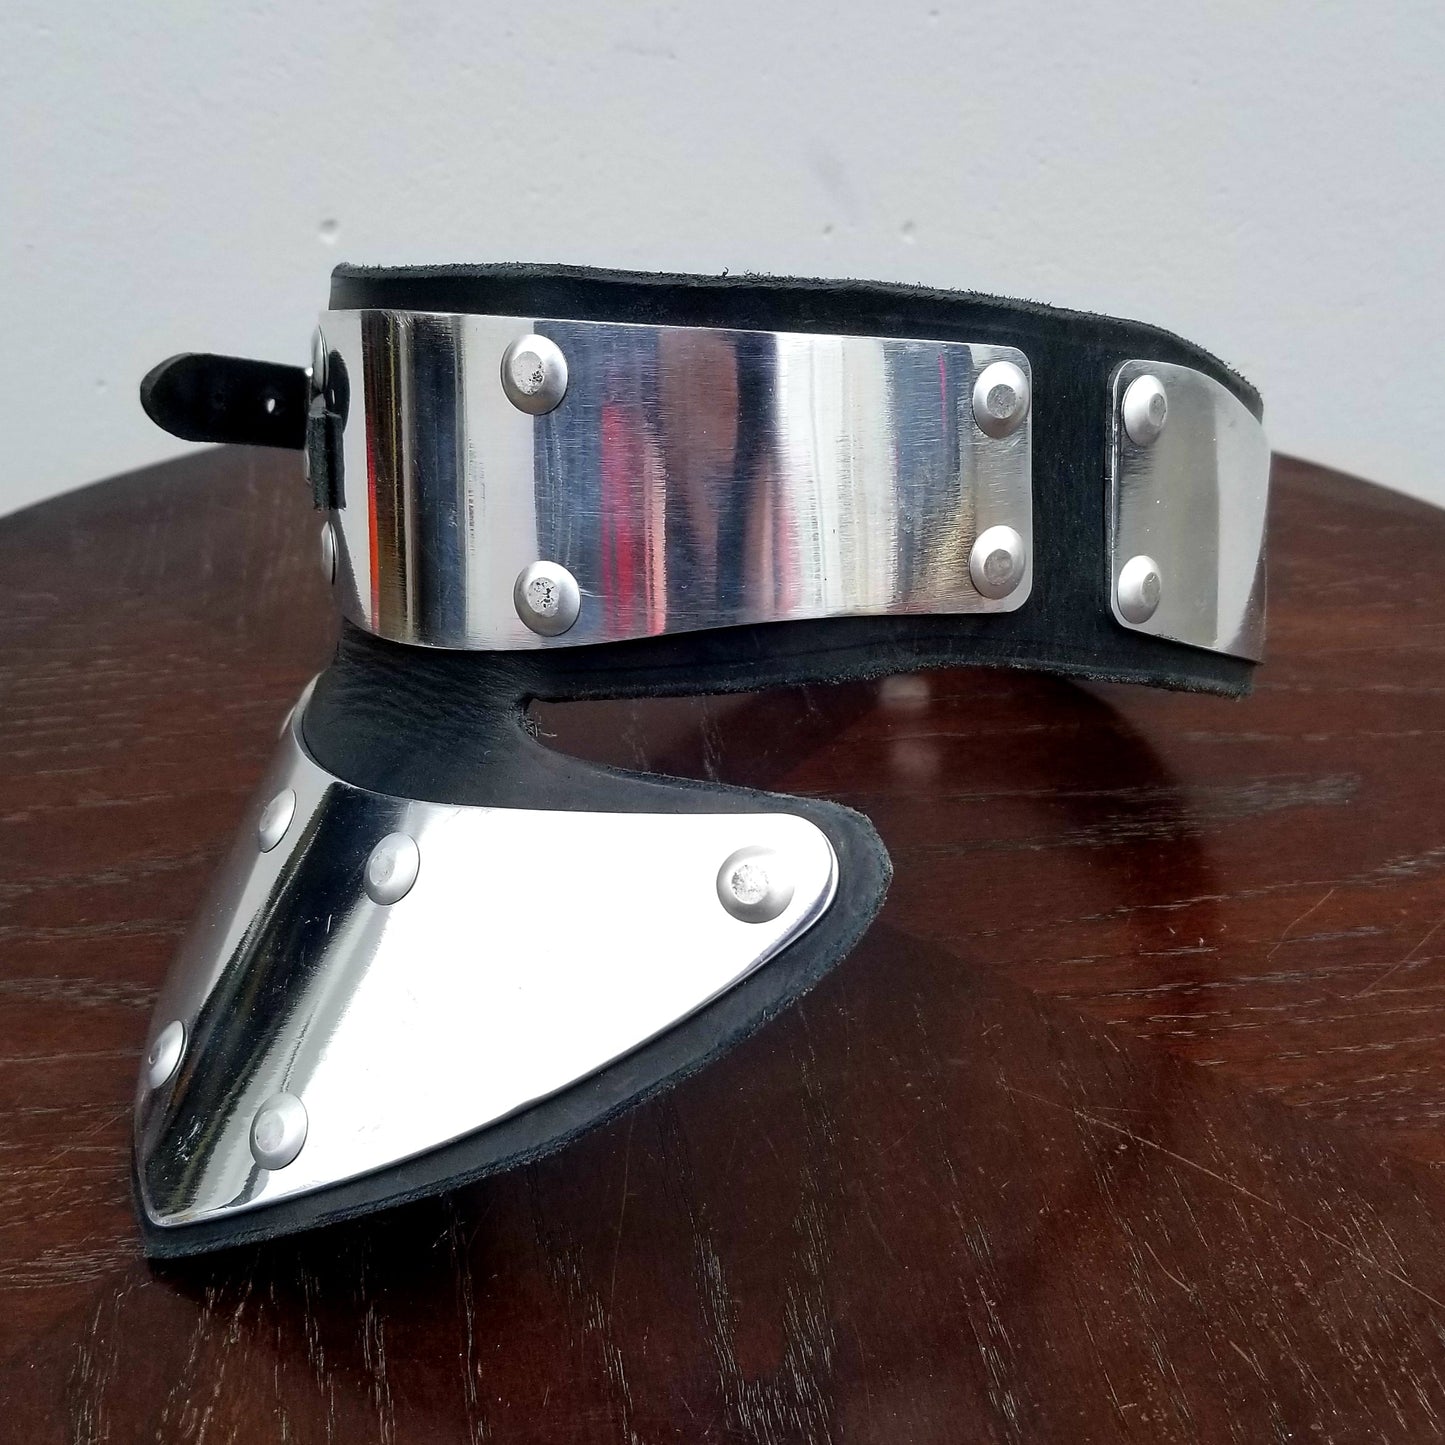 Aluminum and Leather SCA Collar Gorget - Medium/Large (adjustable) Right Side Opening